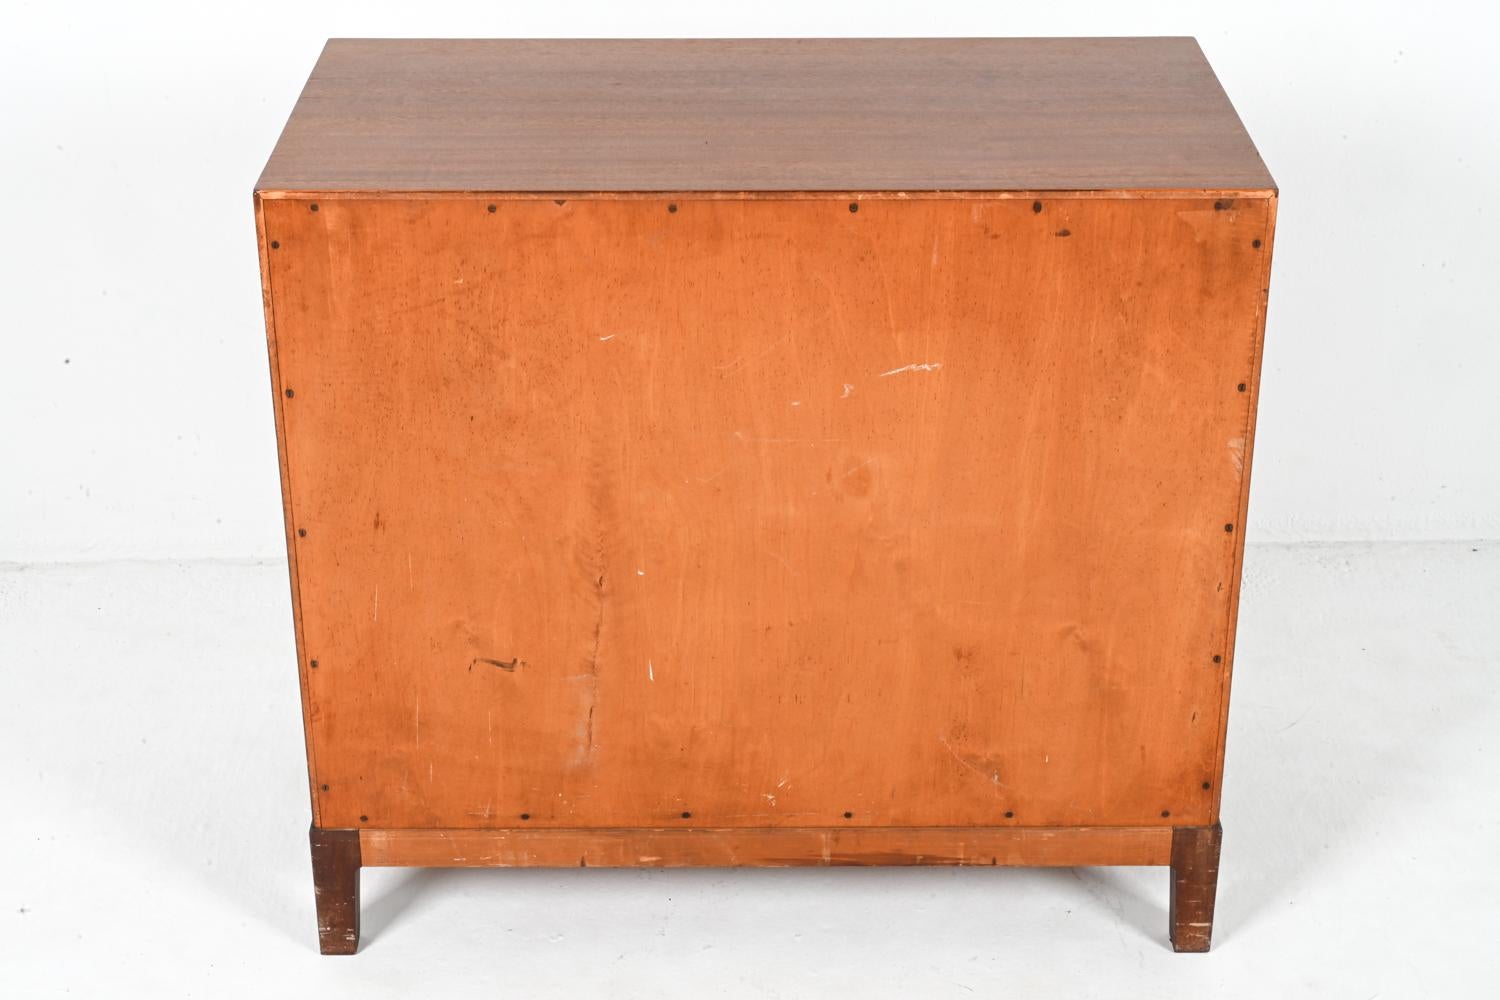 Rare Mahogany Three-Drawer Chest by Ole Wanscher for A. J. Iversen, c. 1940's For Sale 8